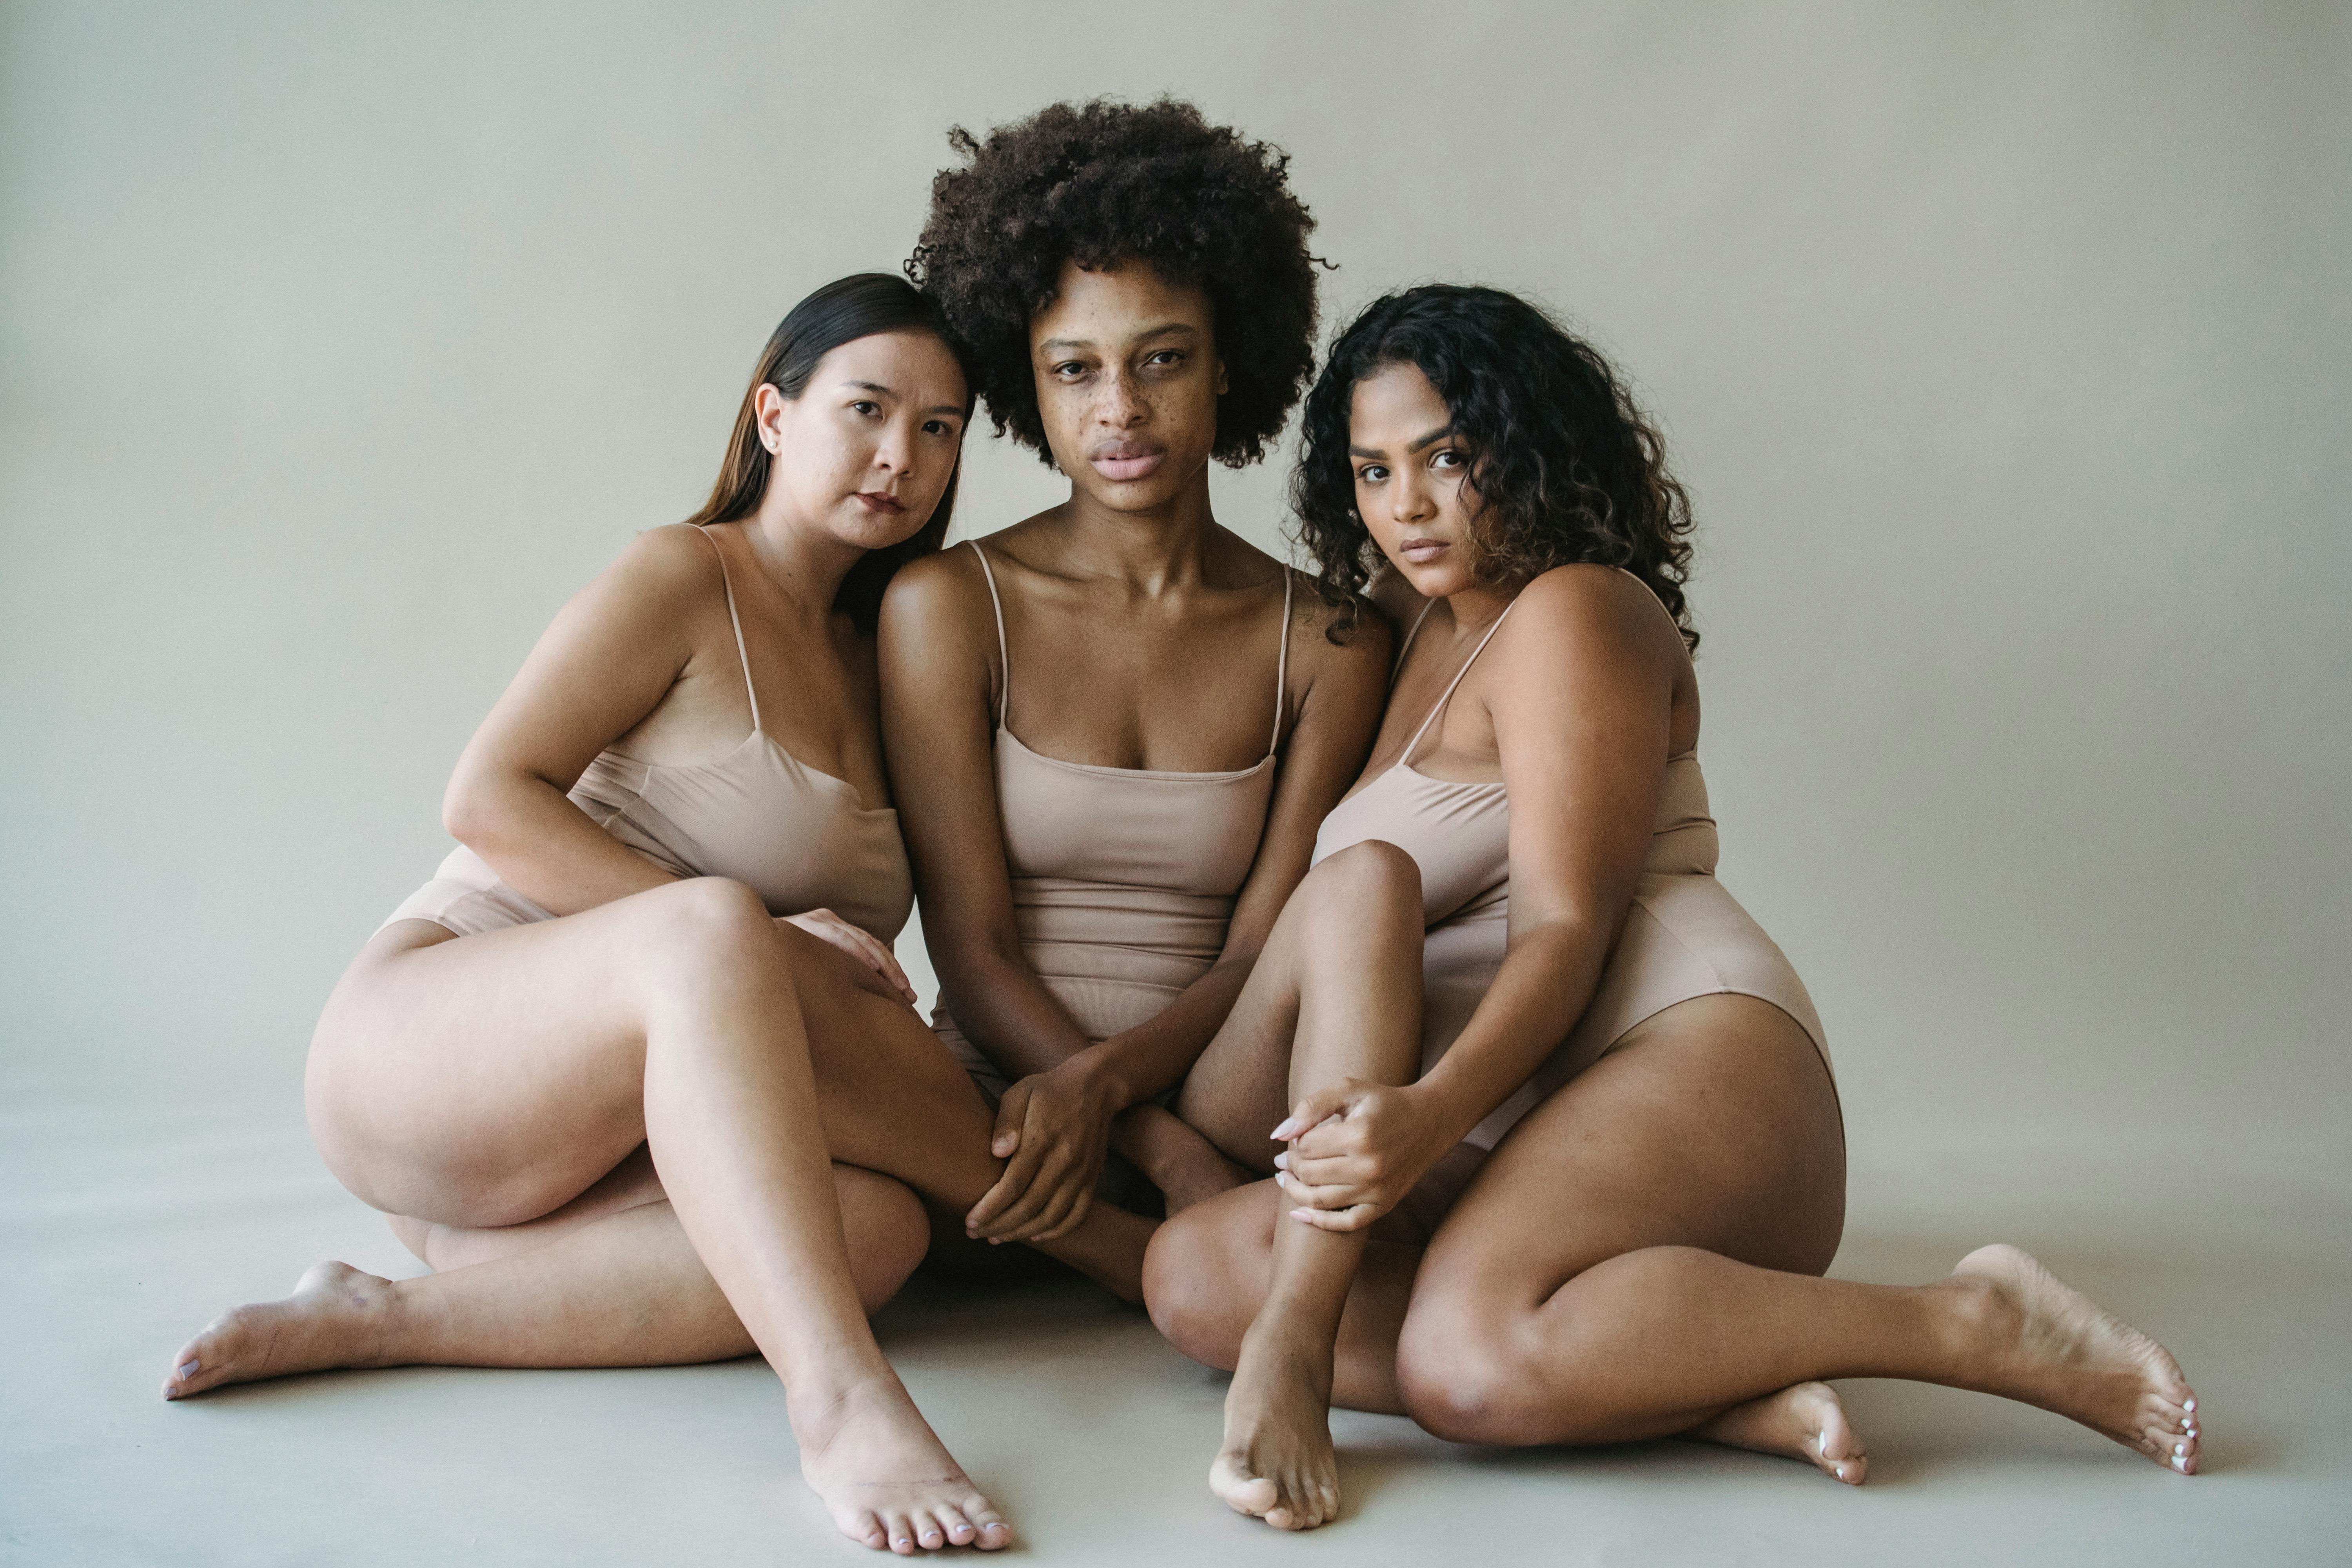 Three Young Women in Underwear Sitting Together on Floor · Free Stock Photo